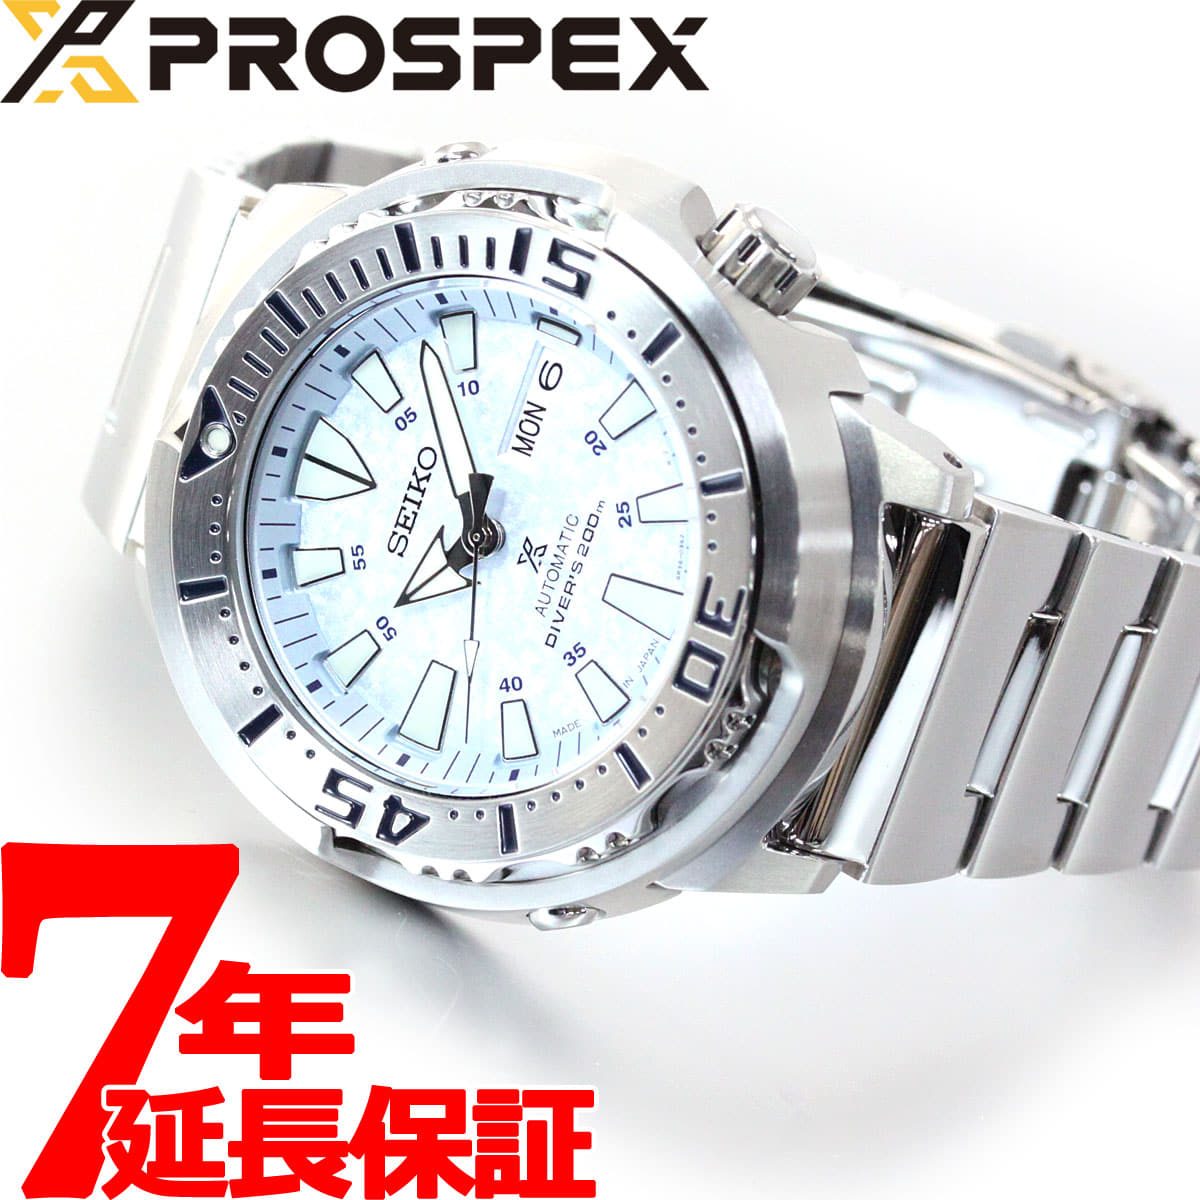 New]SEIKO PROSPEX Diver Scuba Baby Tuna Men's Mechanical Automatic Winding  Watch SBDY053 - BE FORWARD Store